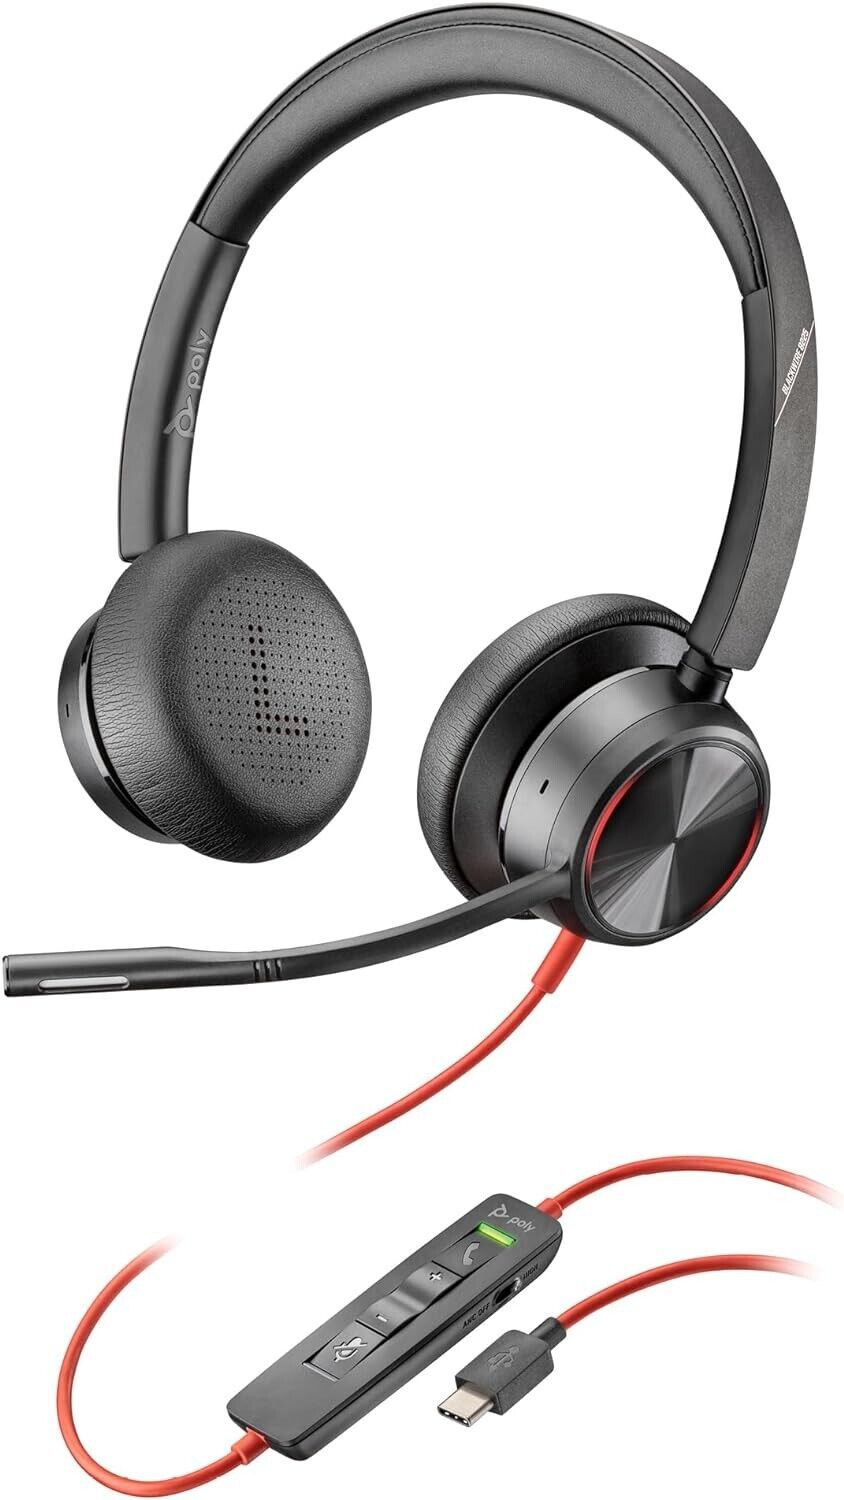 Poly Blackwire 8225 Premium Wired Headset (Plantronics) – Active Noise Canceling